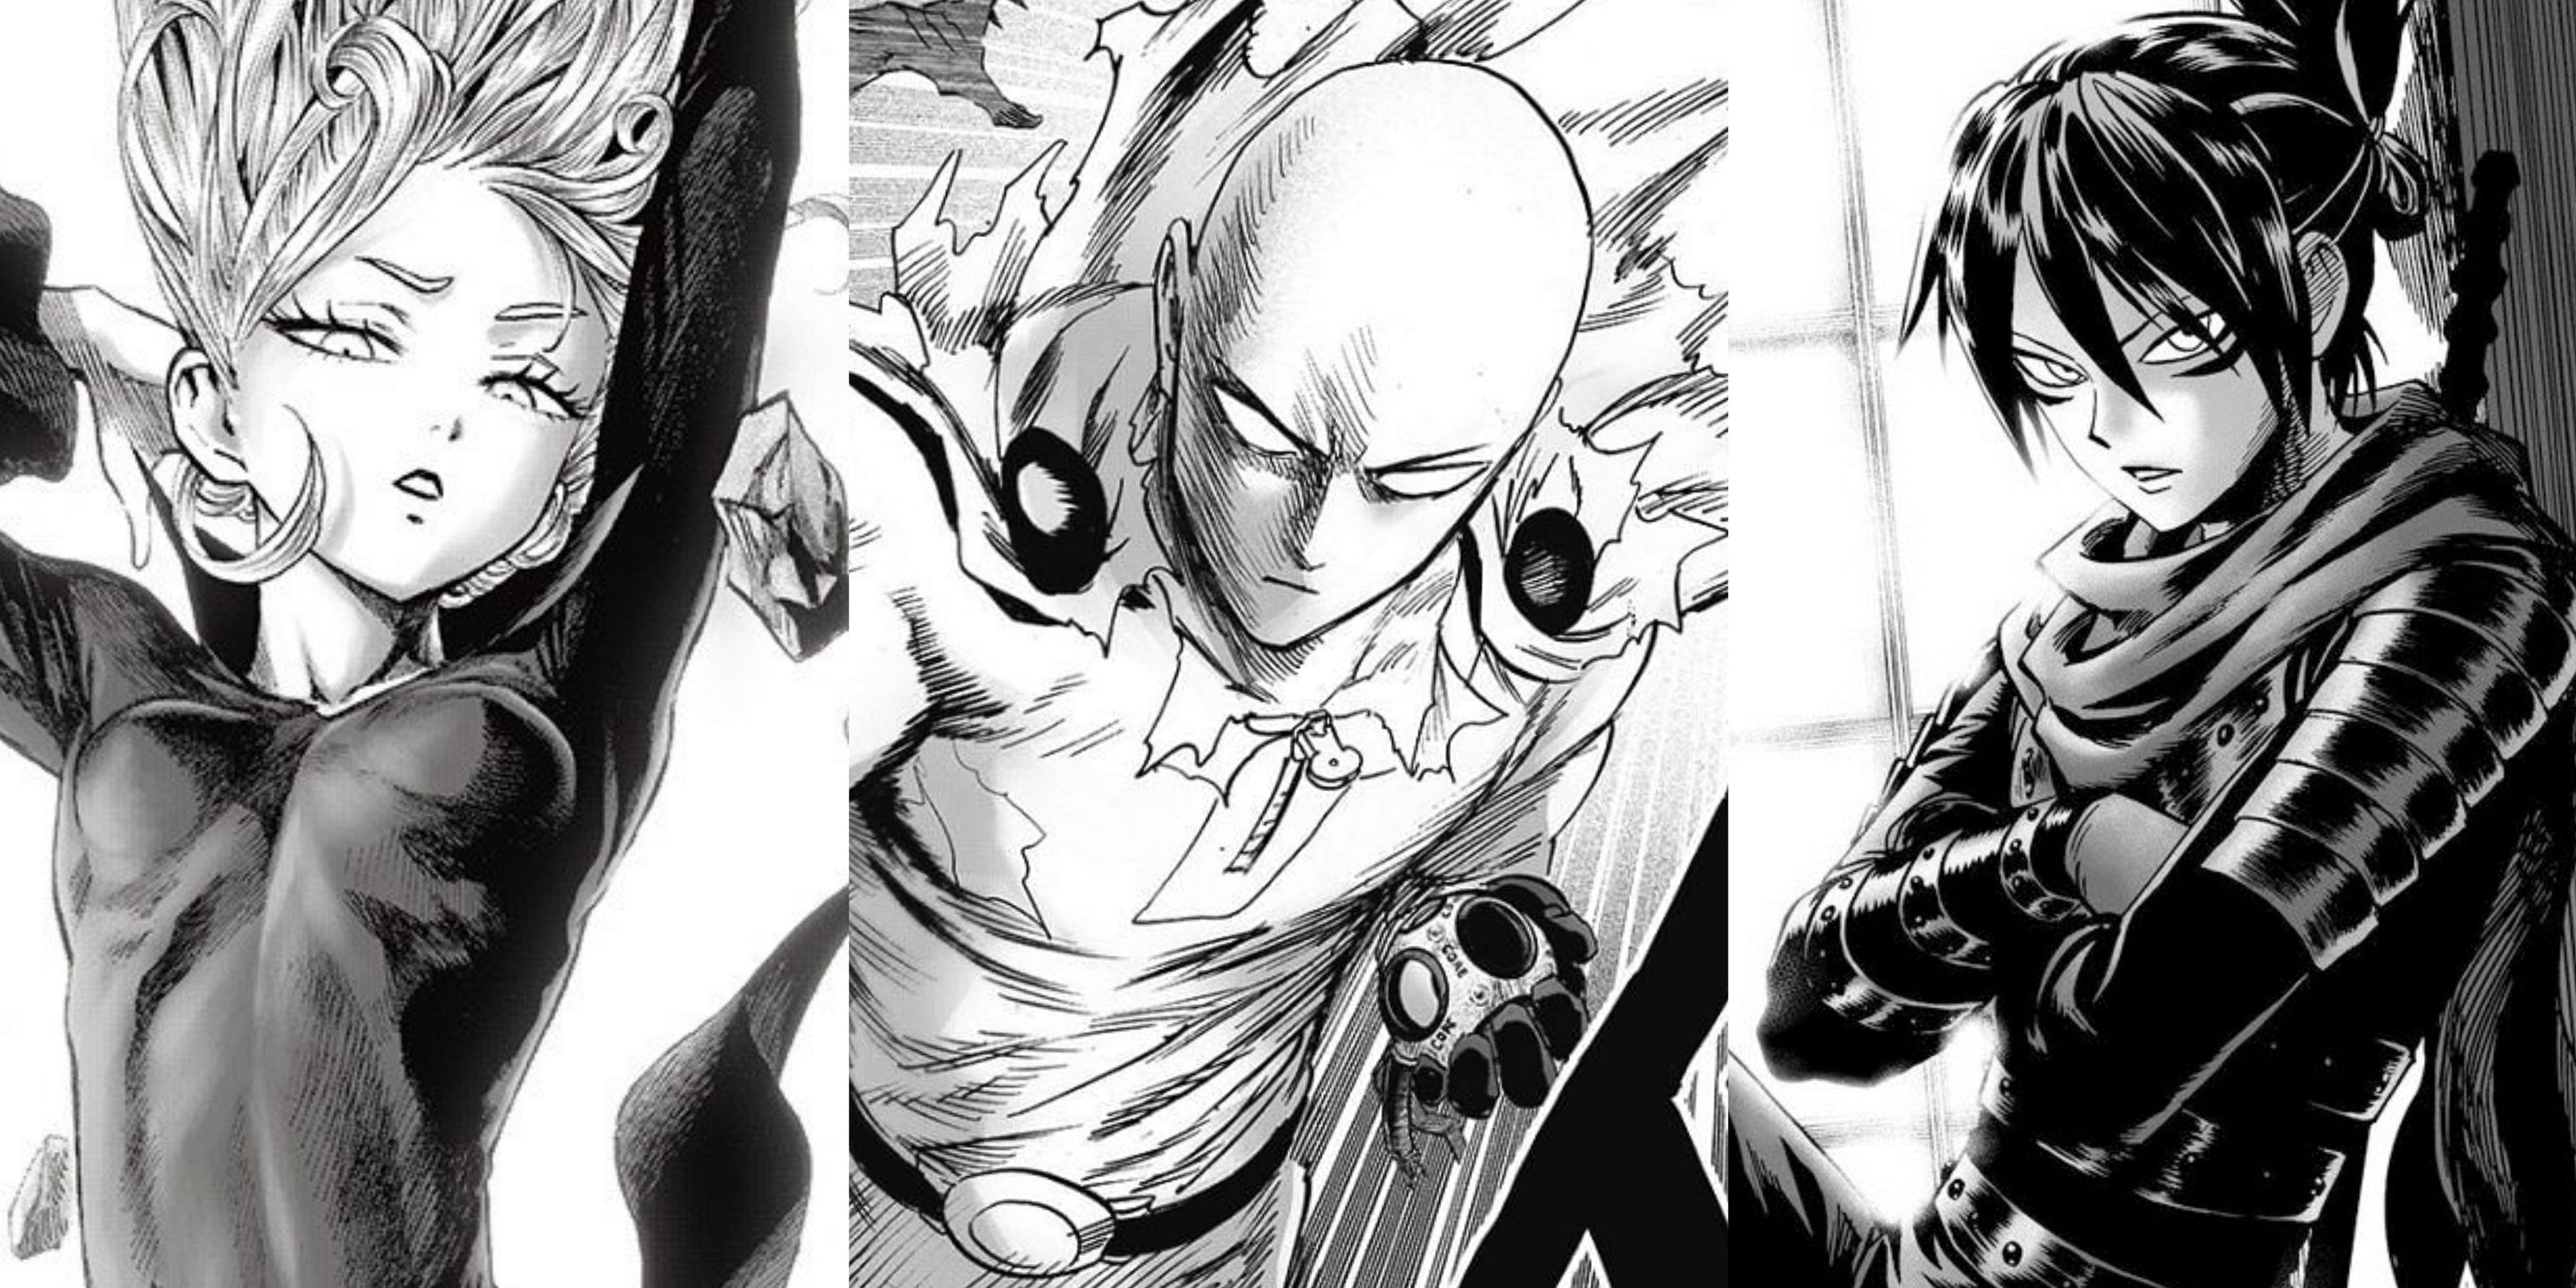 One punch man characters